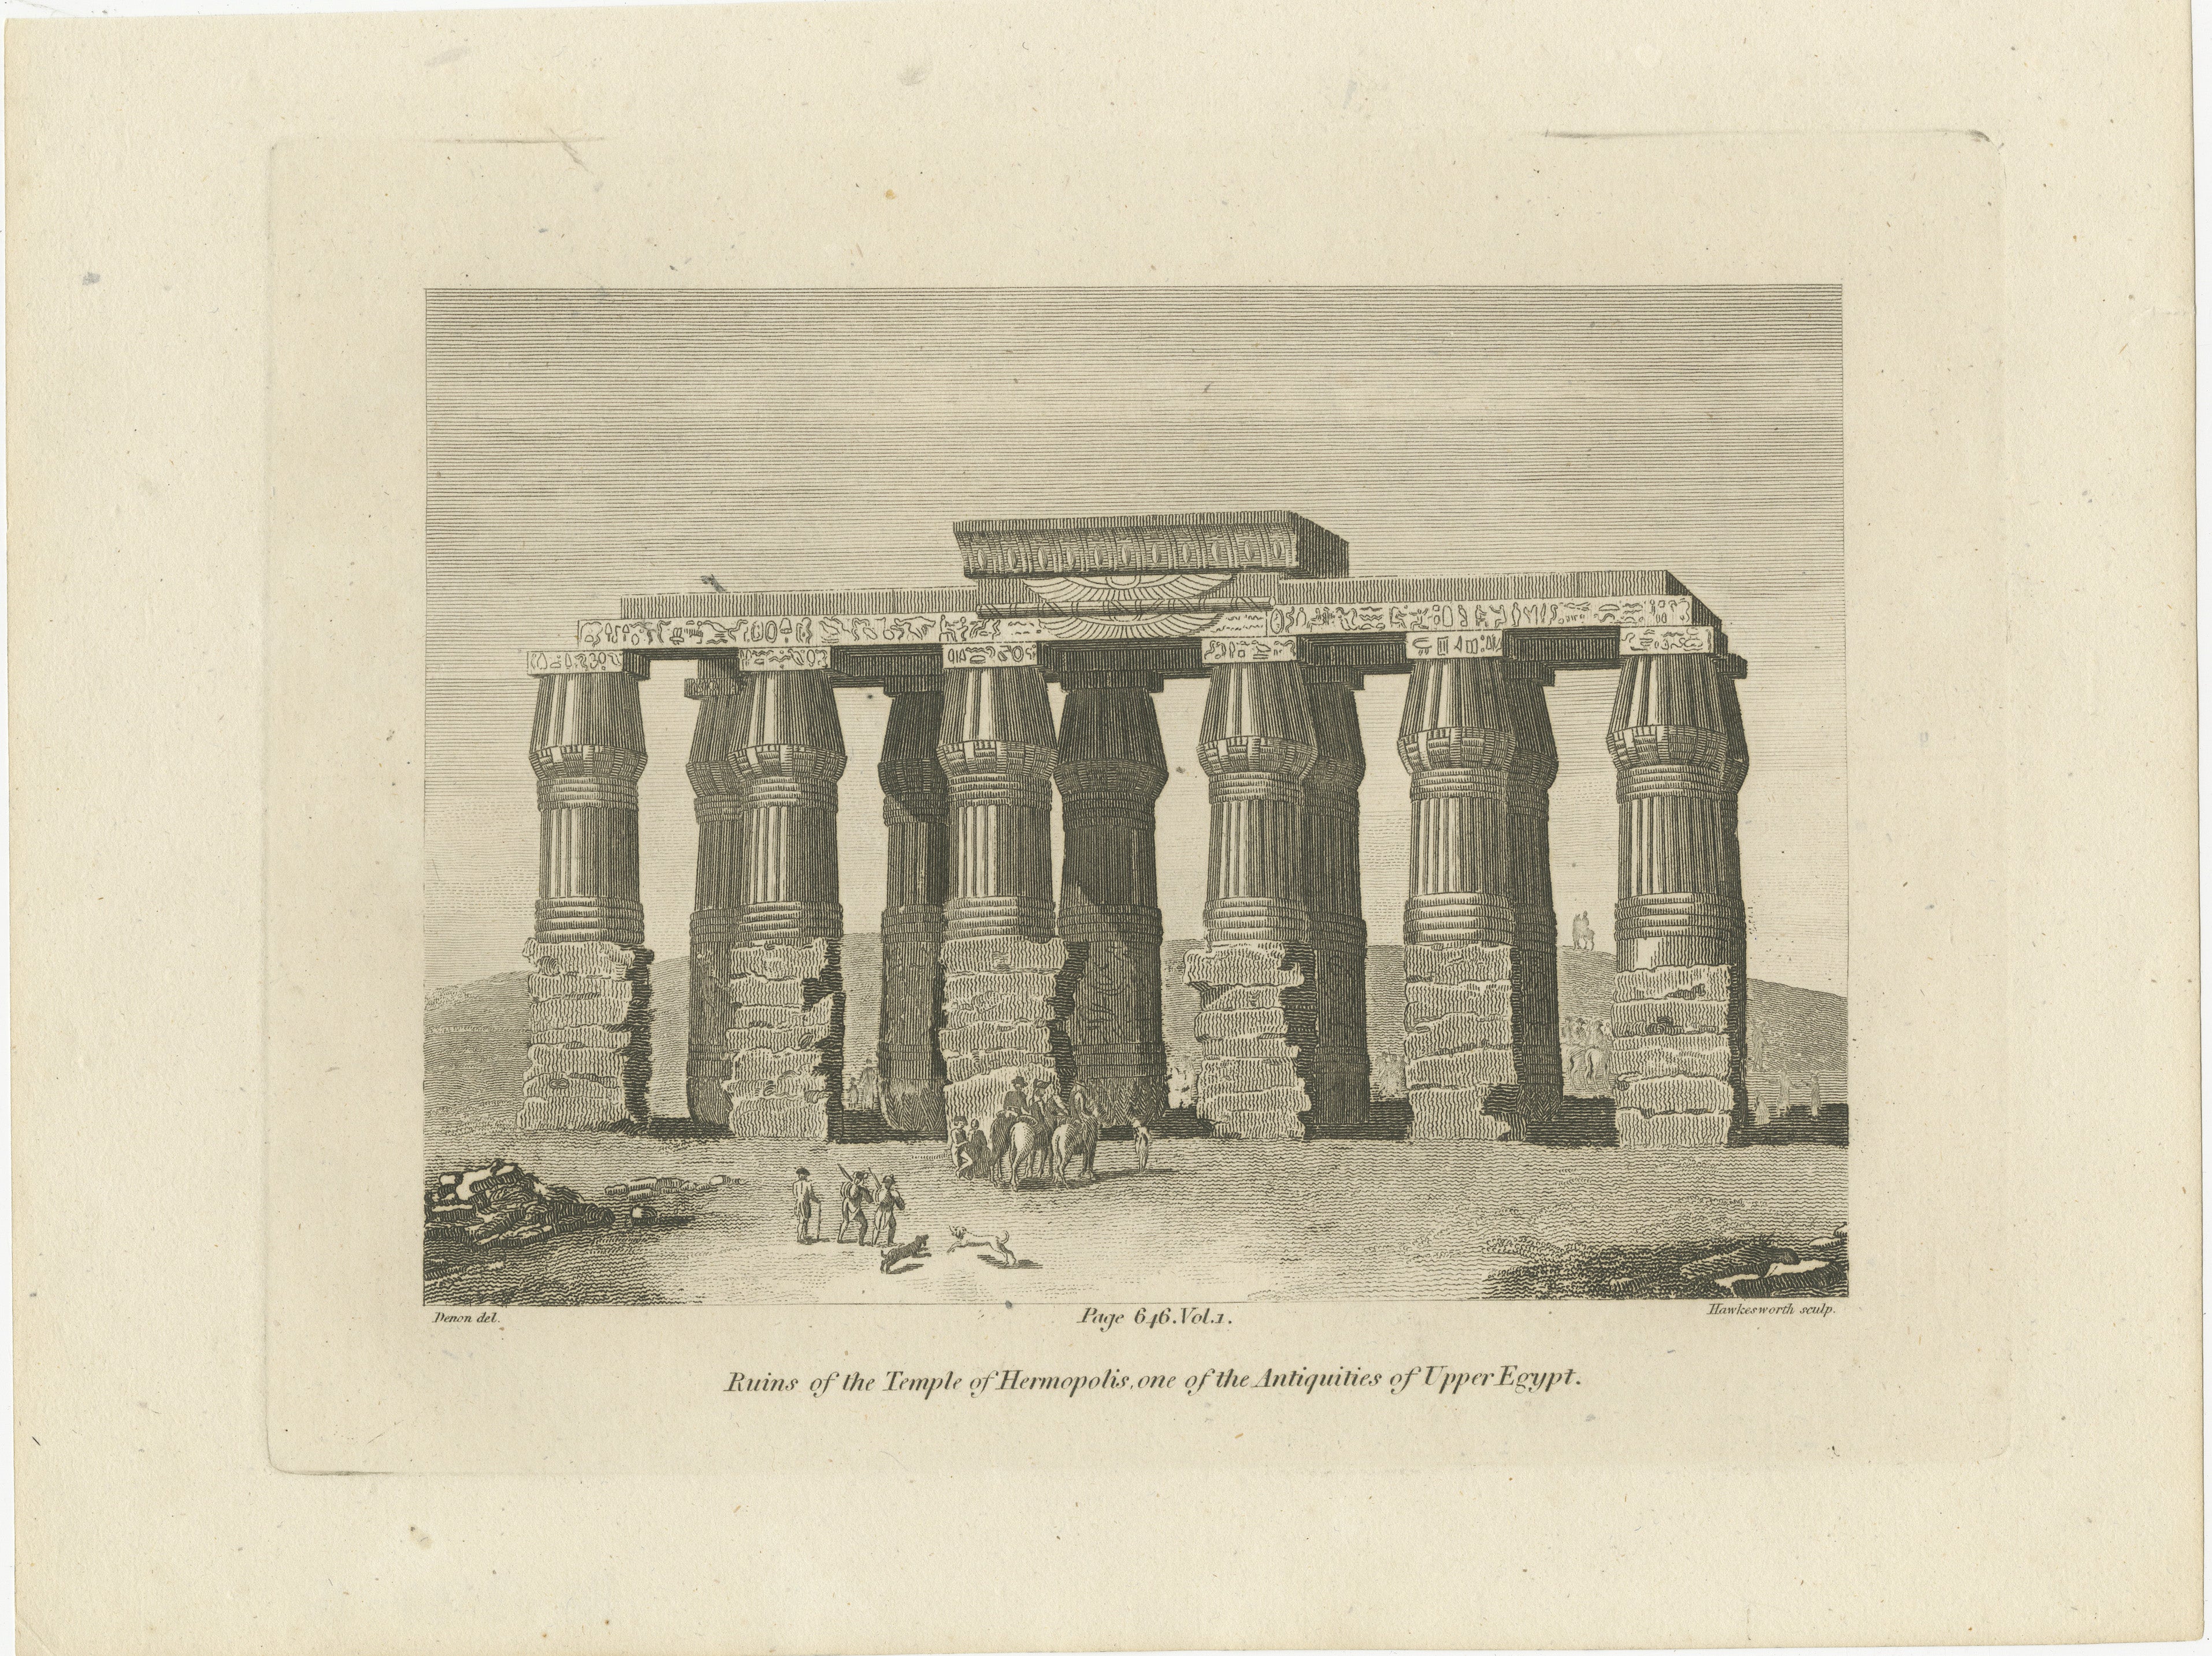 This is an 1820 copperplate engraving by Denon, expertly crafted by Hawkesworth, depicting the ruins of the Temple of Hermopolis in Egypt. 

Ruins of the Temple of Hermopolis, Upper Egypt, was one of the sites surveyed by the French during Napoleons